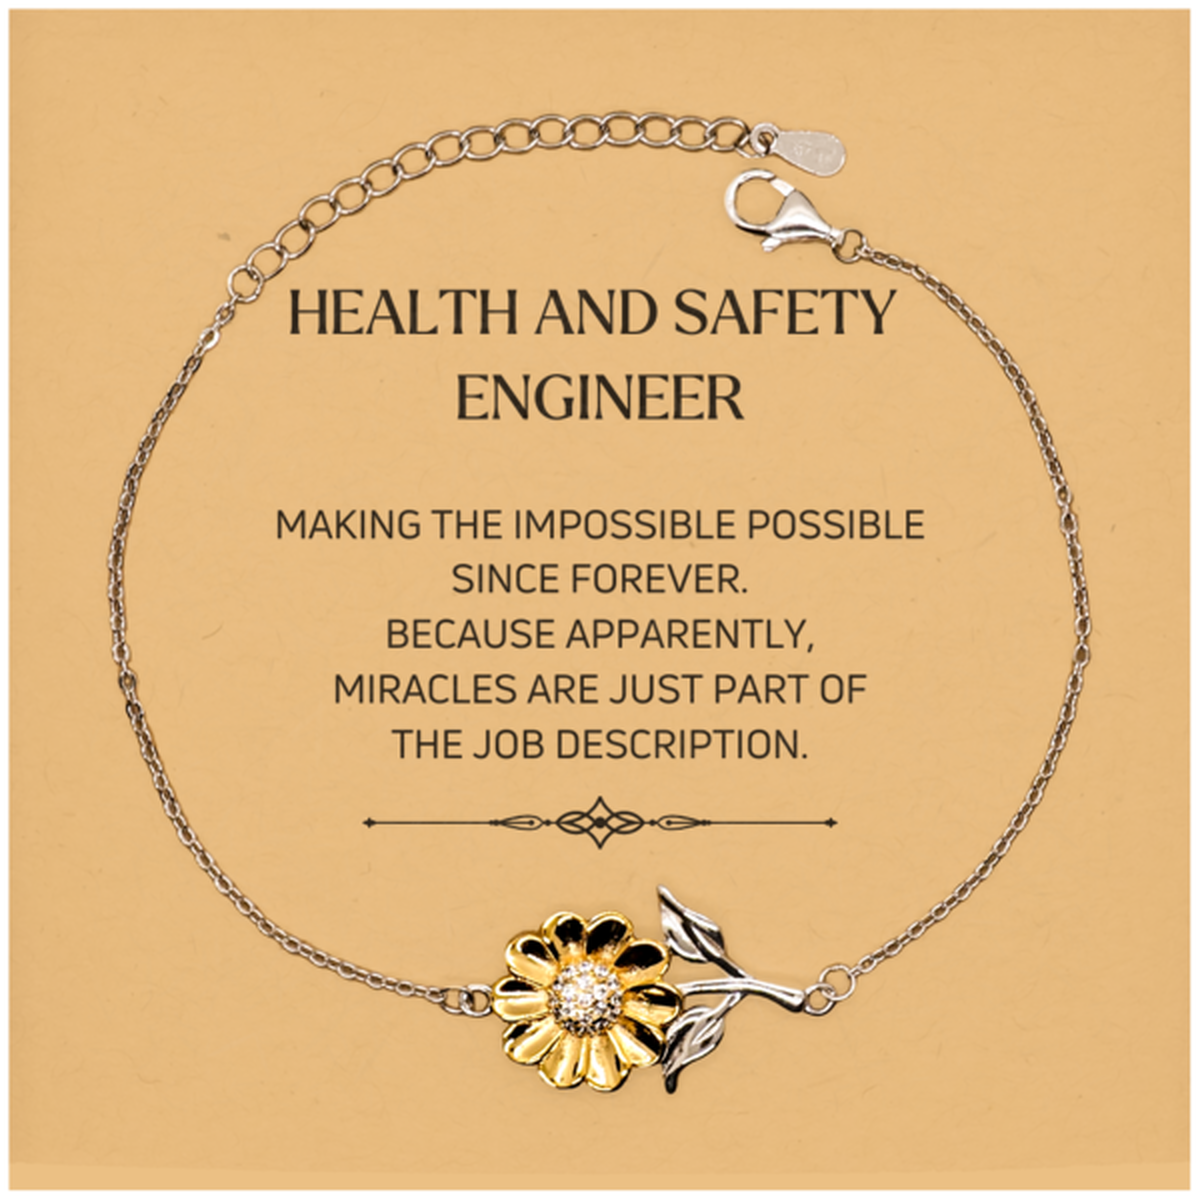 Funny Health and Safety Engineer Gifts, Miracles are just part of the job description, Inspirational Birthday Christmas Sunflower Bracelet For Health and Safety Engineer, Men, Women, Coworkers, Friends, Boss